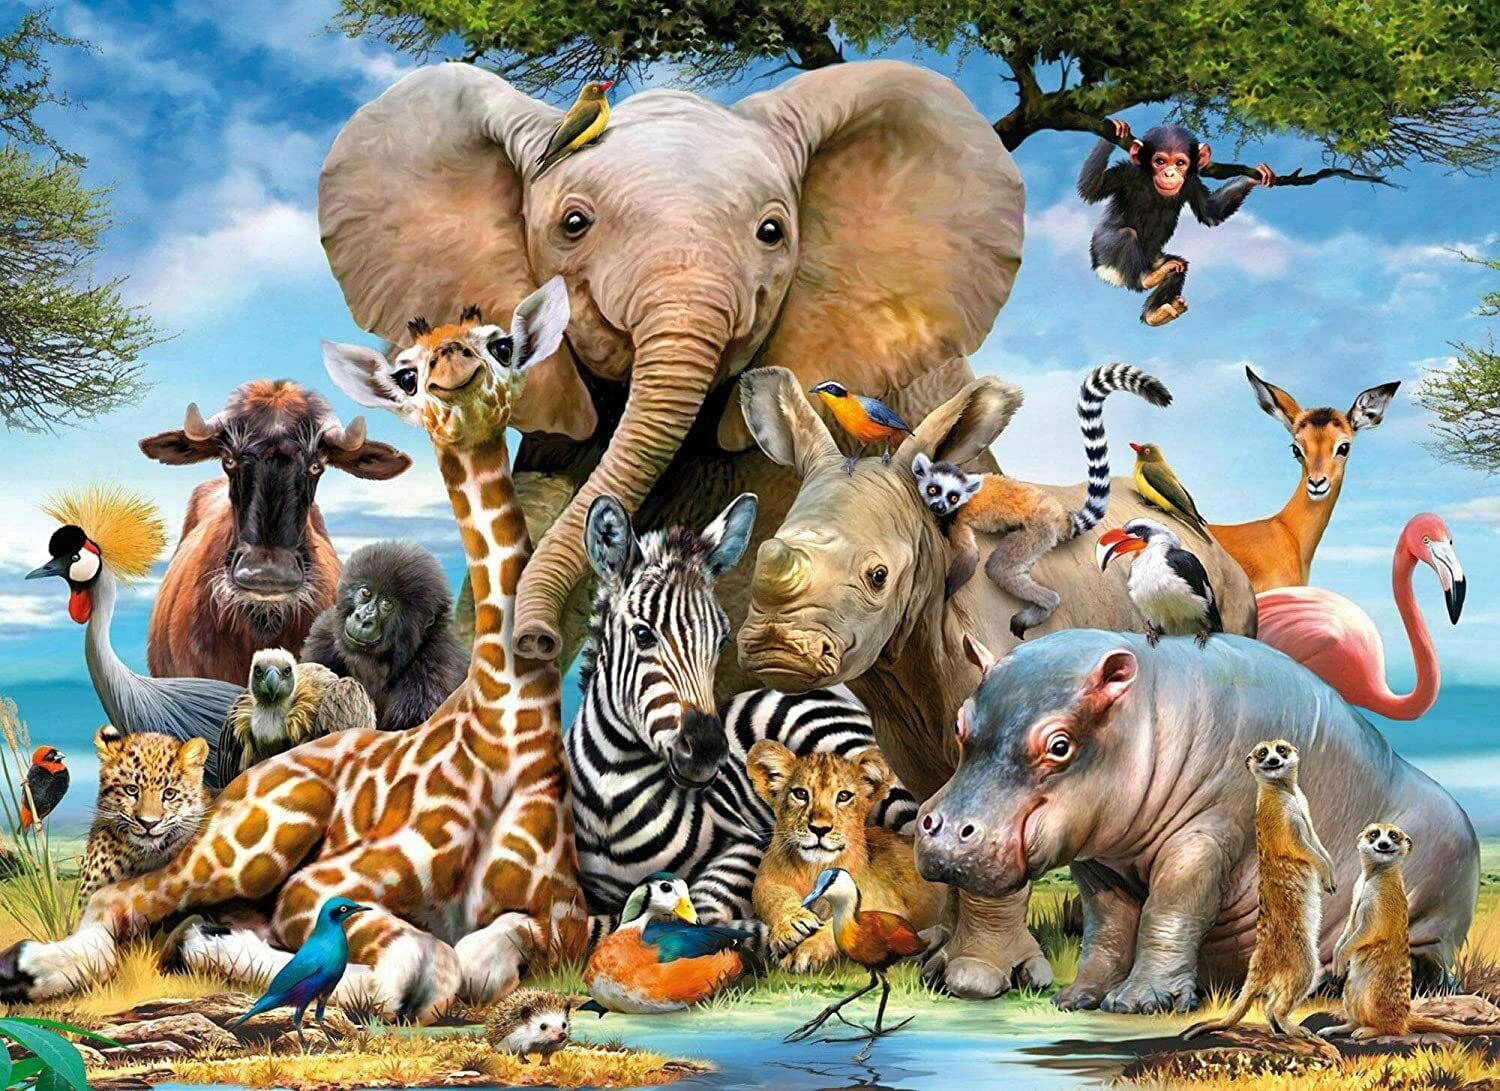 Jigsaw Puzzles 4000 Pieces for AdultElephant-4000 4000 Pieces Jigsaw Puzzles Wooden Jigsaw Puzzle Game